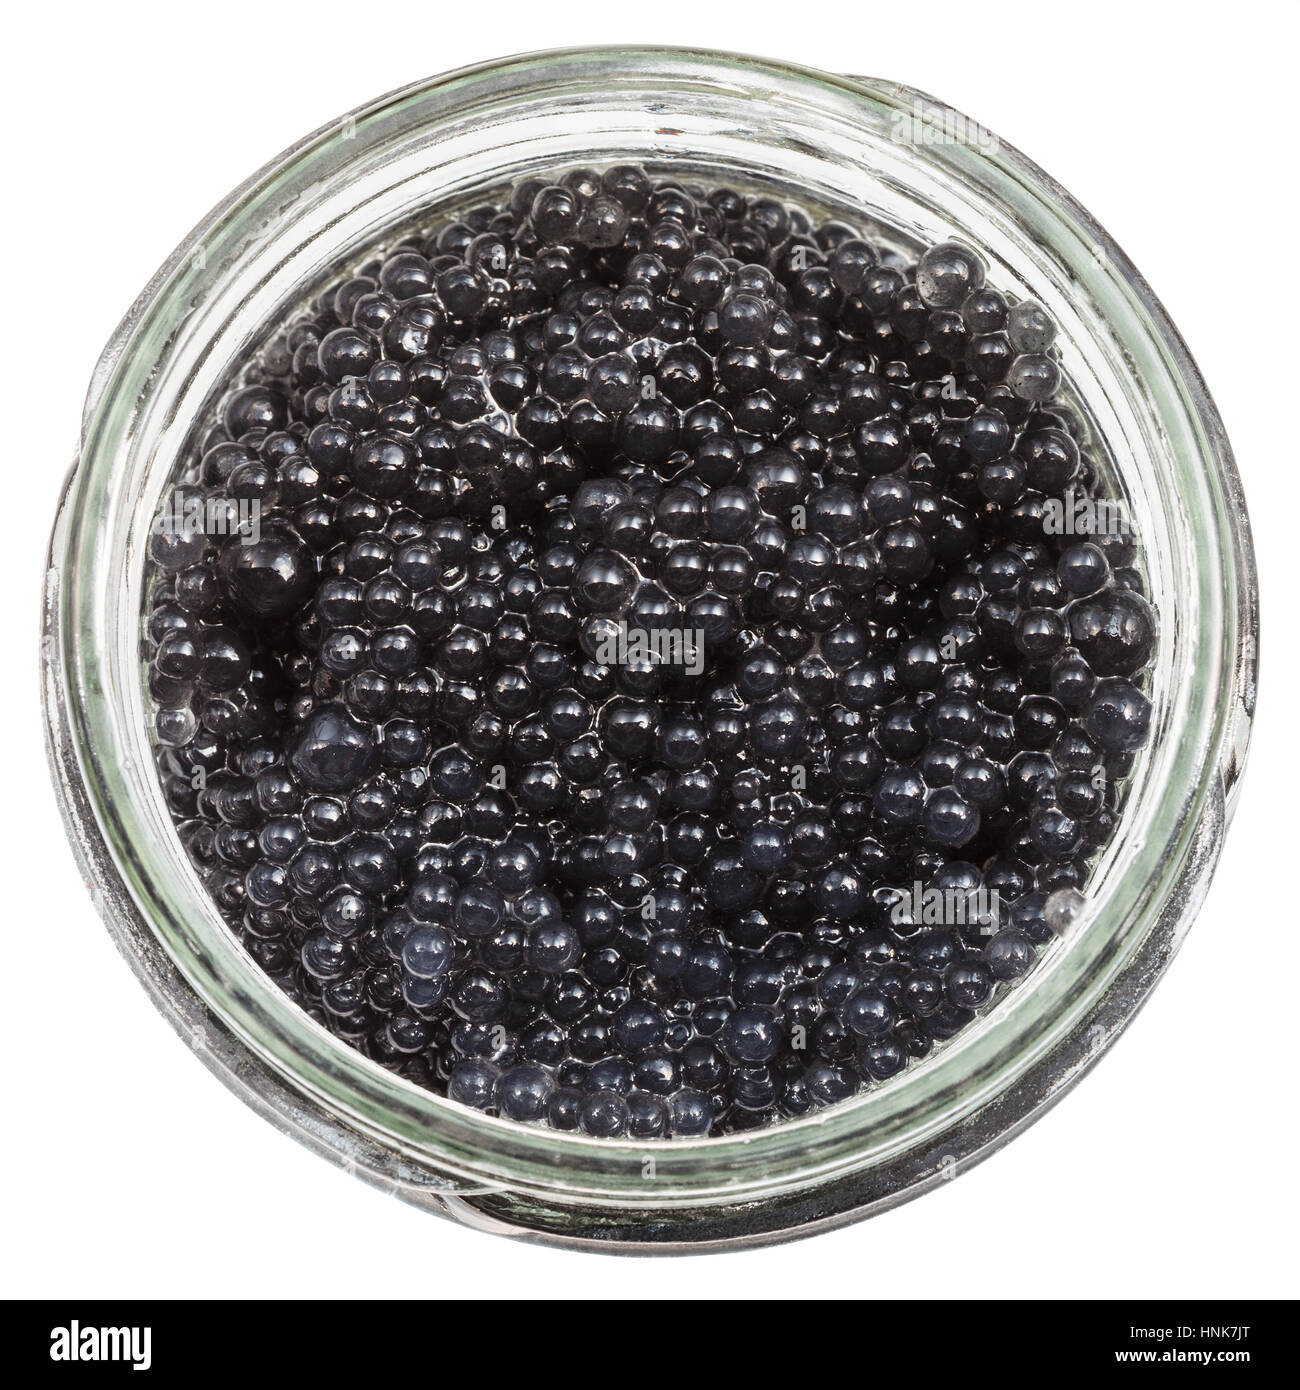 top view of black coloured pickled caviar of halibut fish in glass jar isolated on white background Stock Photo